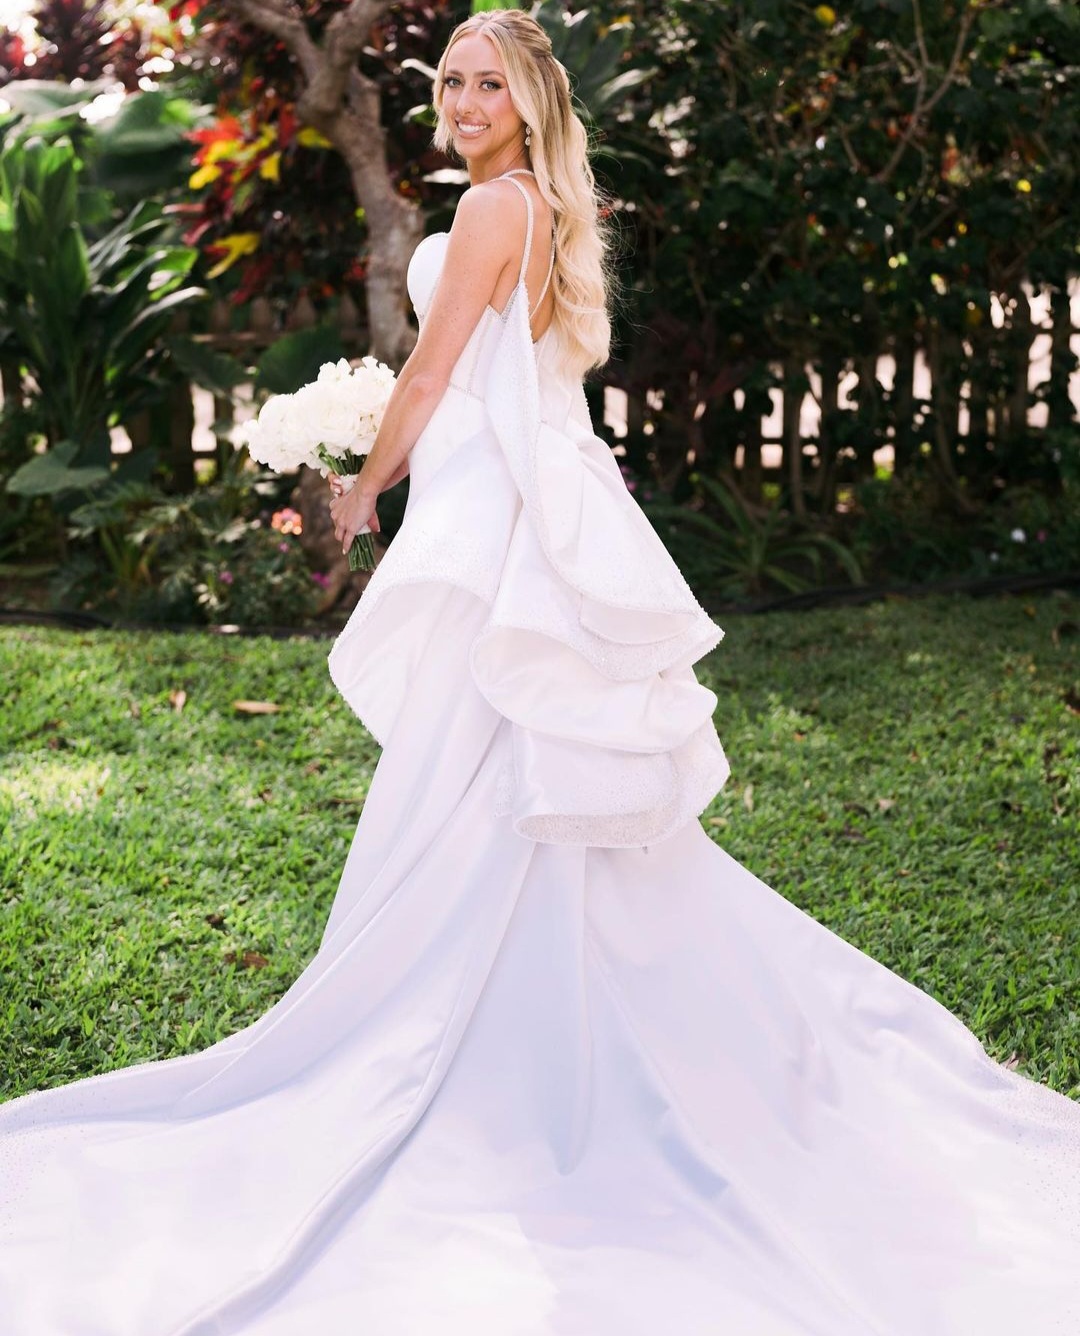 Say yes to the dress: Brittany shares stunning photos of her wedding dress